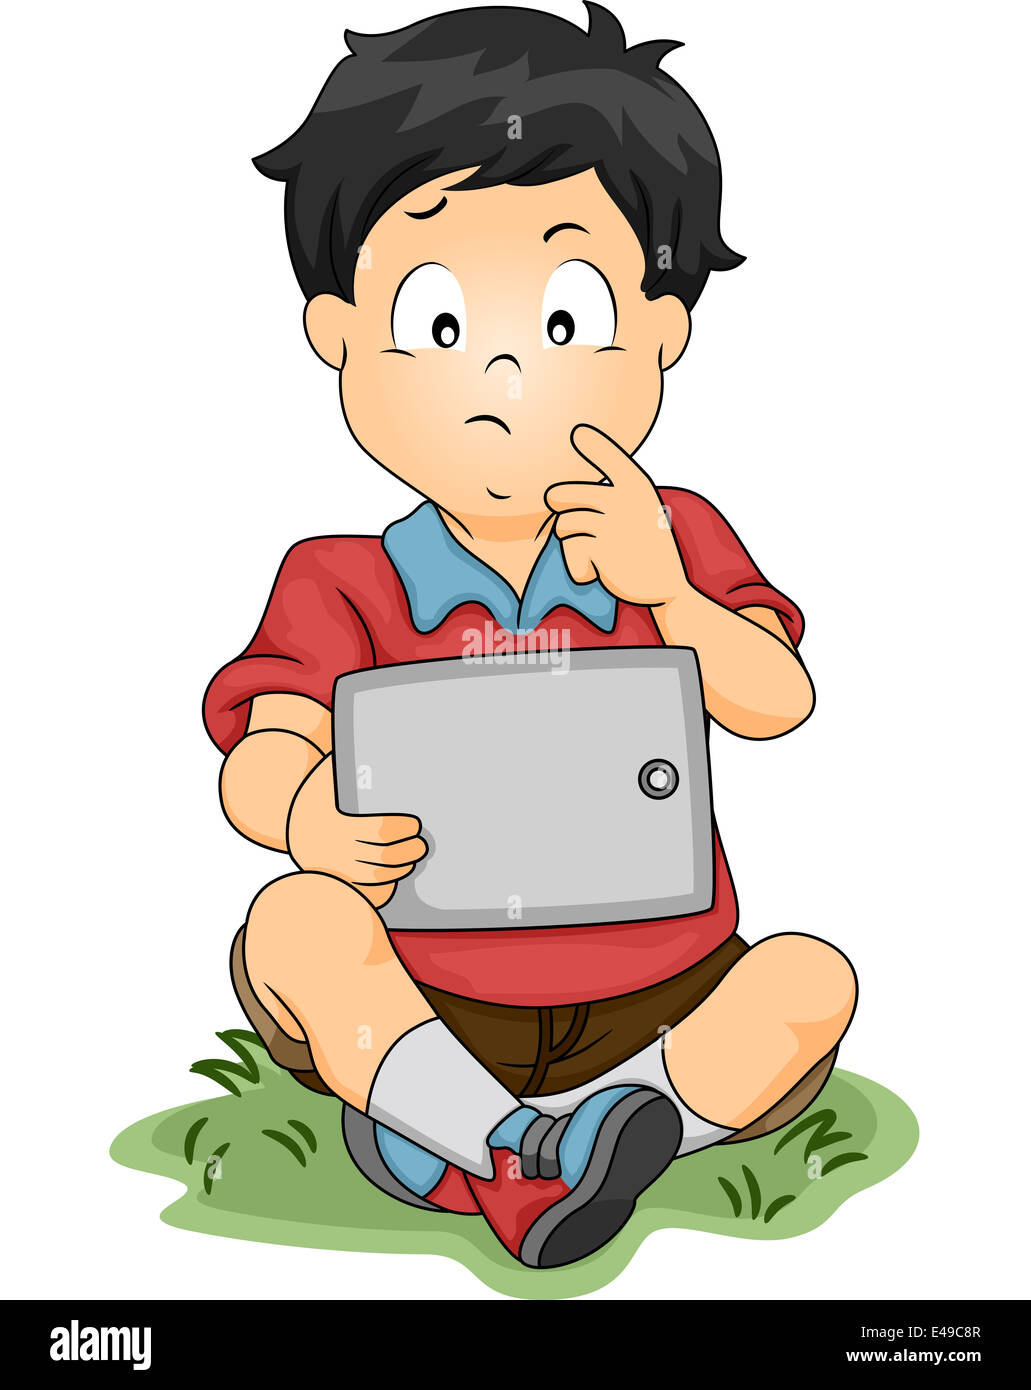 Illustration of a Little Boy Thinking About Something While Looking at a  Tablet Stock Photo - Alamy